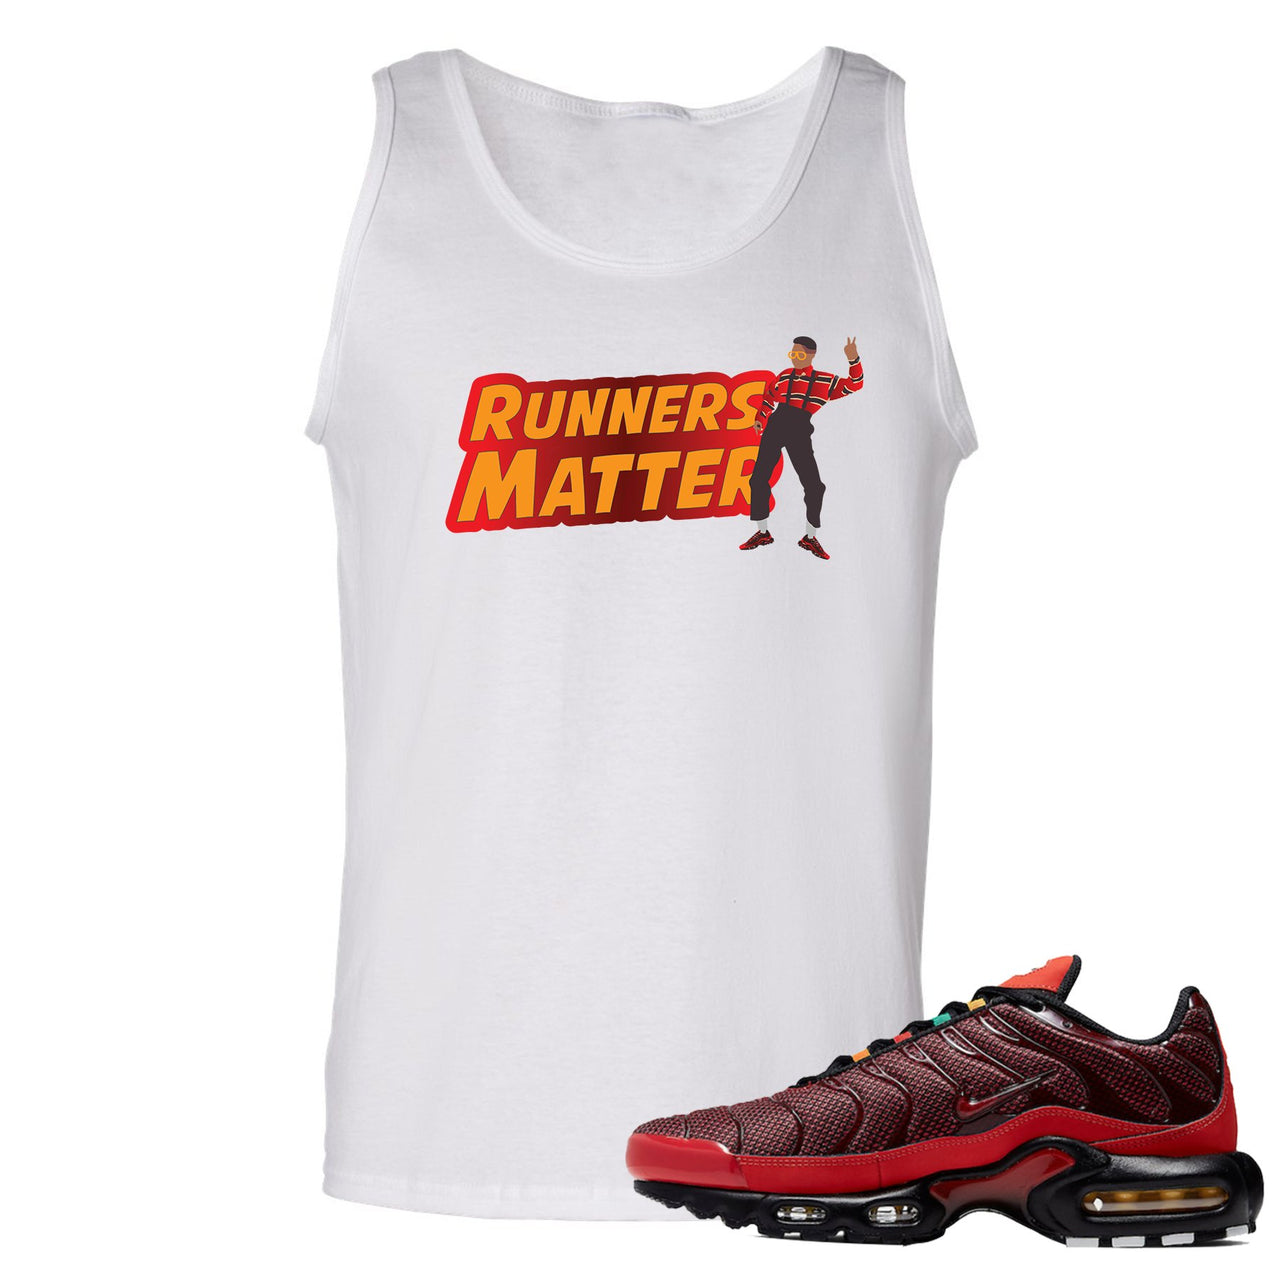 printed on the front of the air max plus sunburst sneaker matching white tank top is the runners matter logo